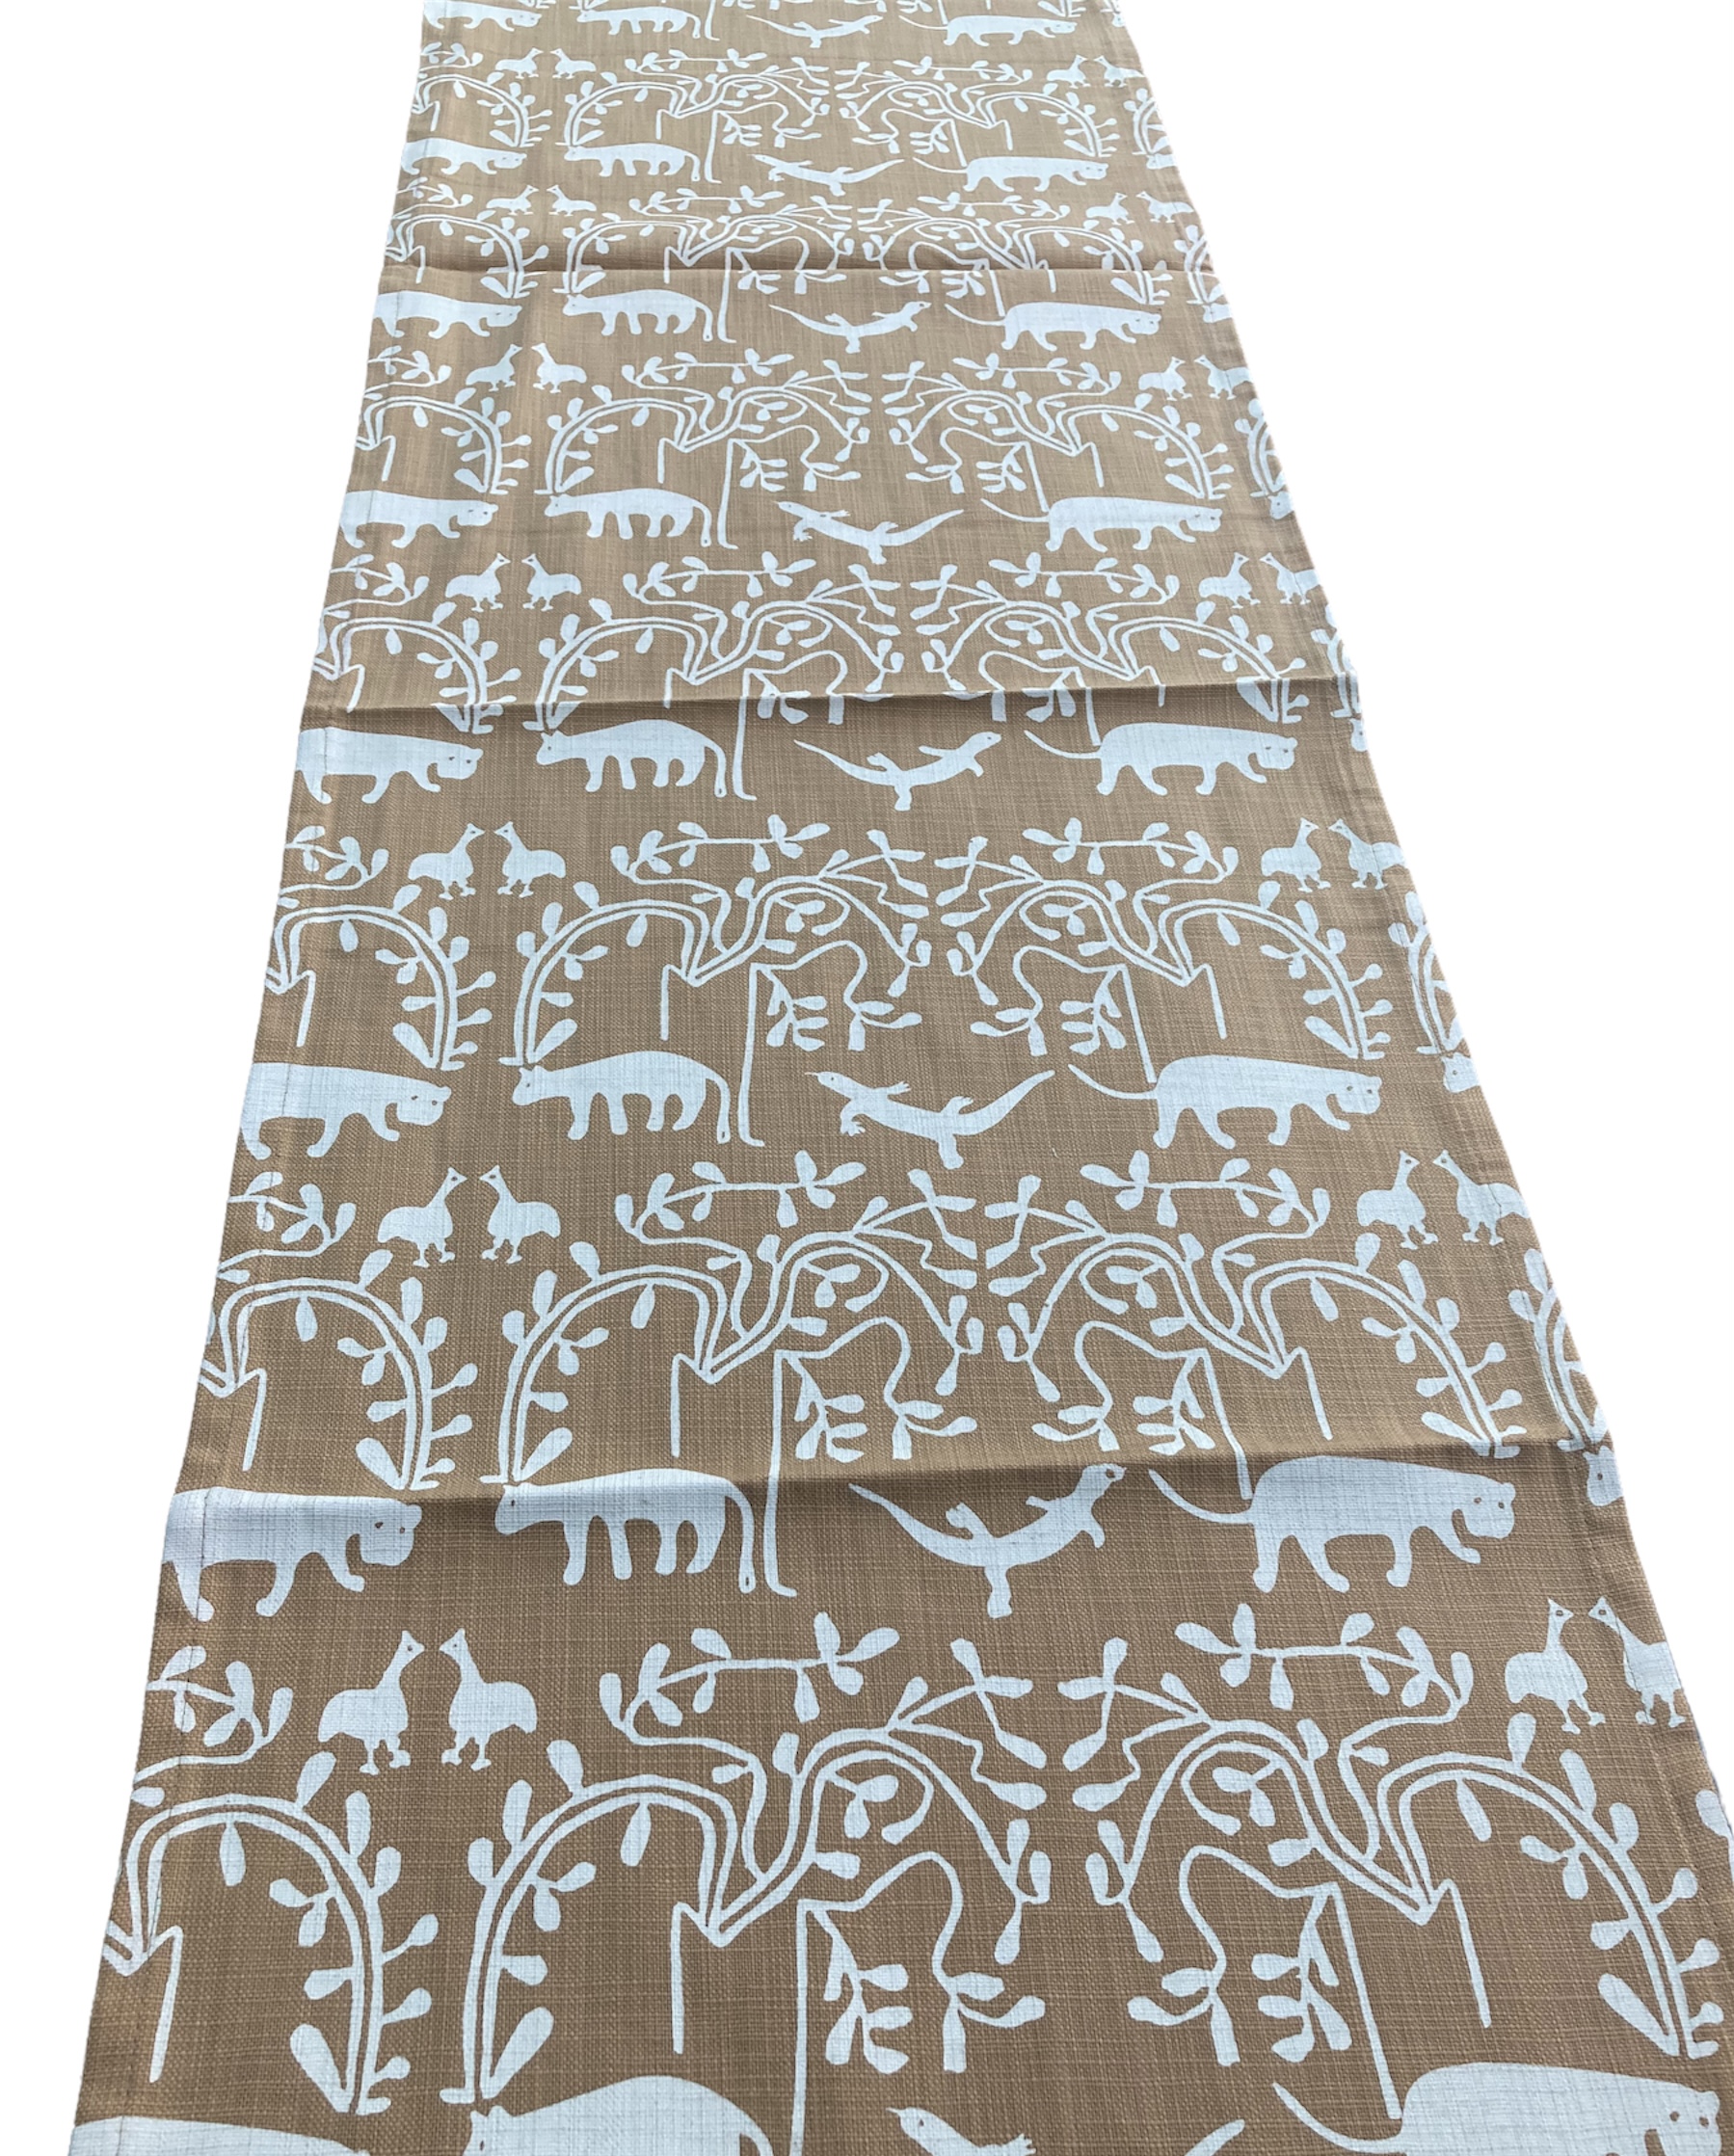 100% cotton Table Runner 58" x 16" from Namibia - Design 17s